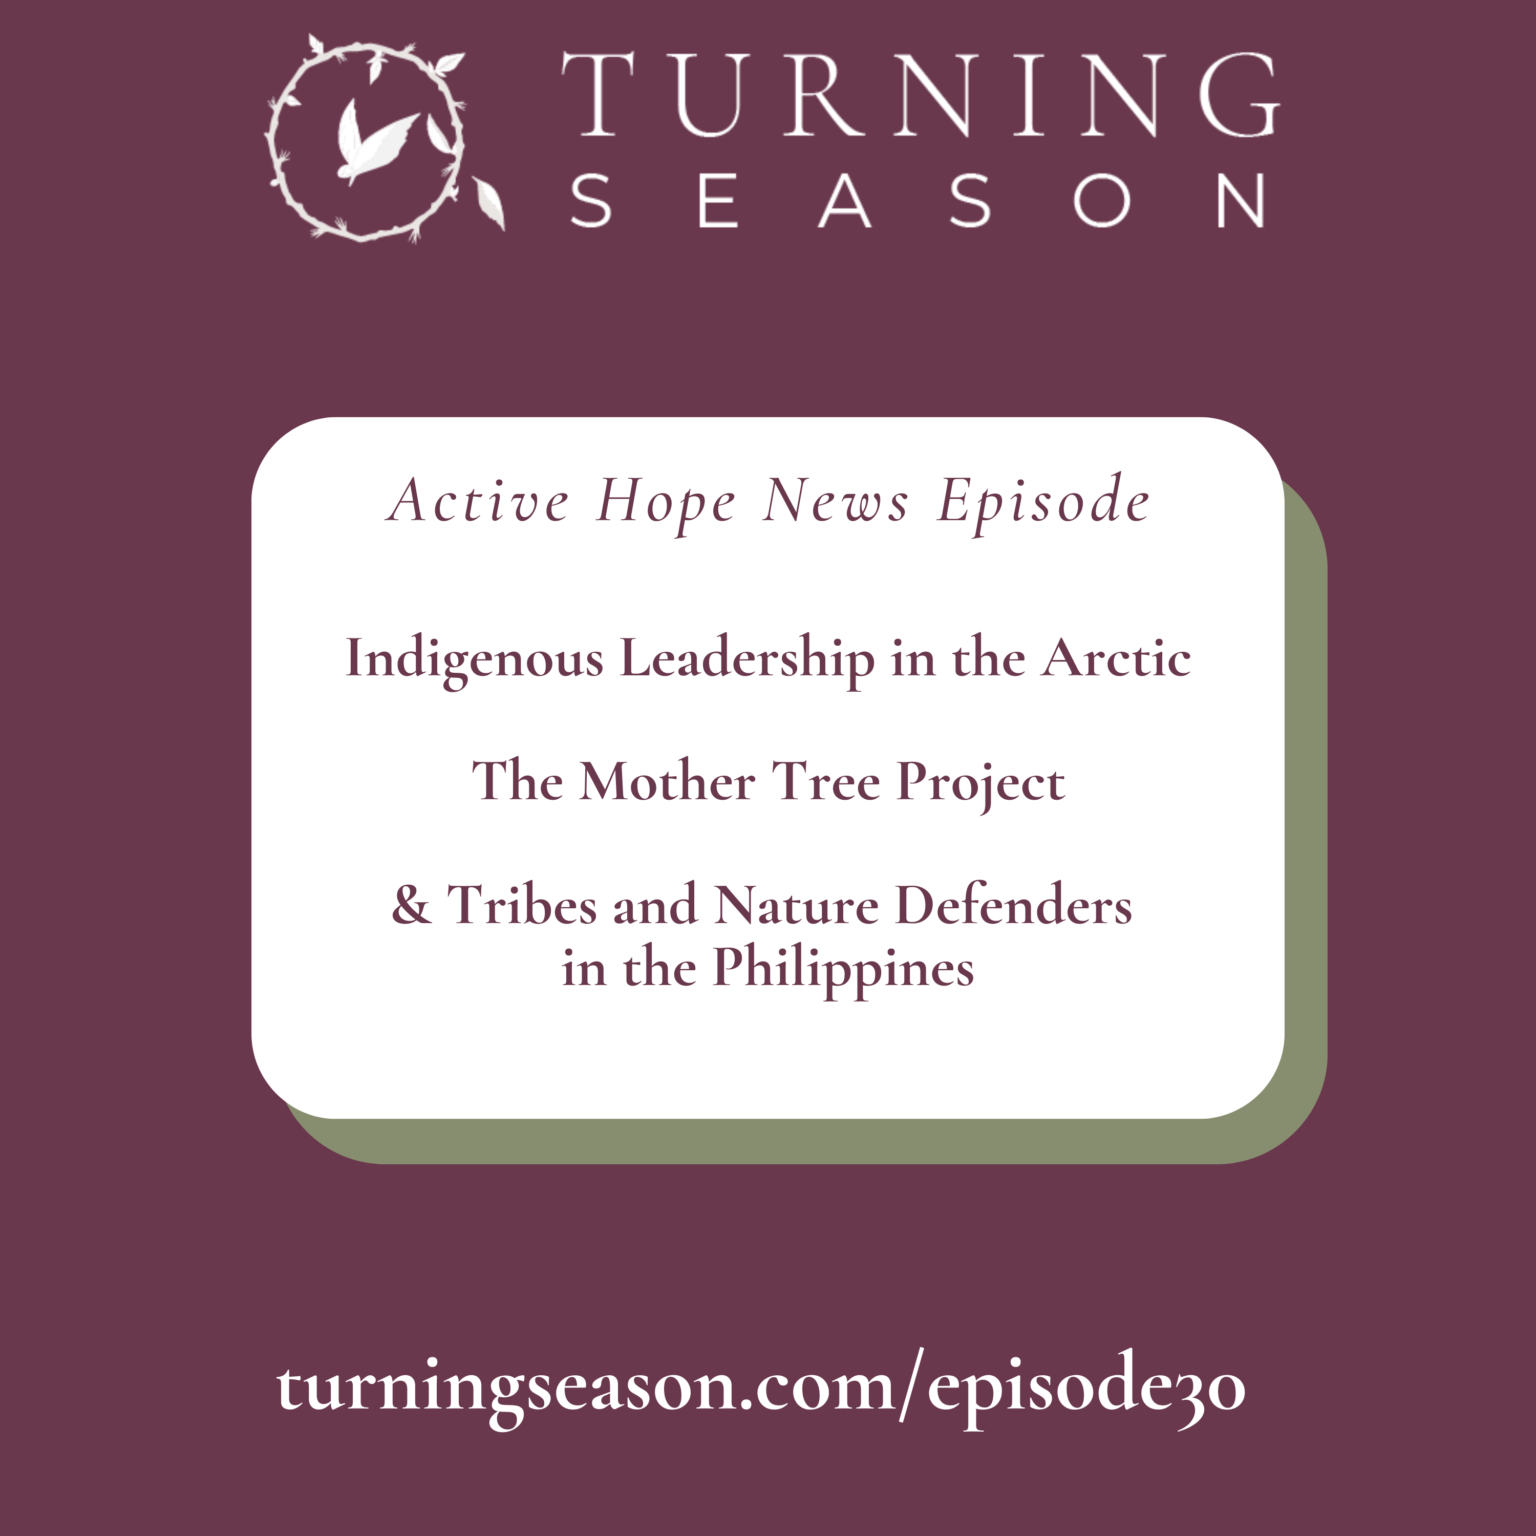 Turning-Season-Podcast-Episode-30-News-on-Indigenous-Leadership-in-the-Arctic-The-Mother-Tree-Project-and-Tribes-and-Nature-Defenders-in-the-Philippines-with-Leilani-Navar-turningseason.com_